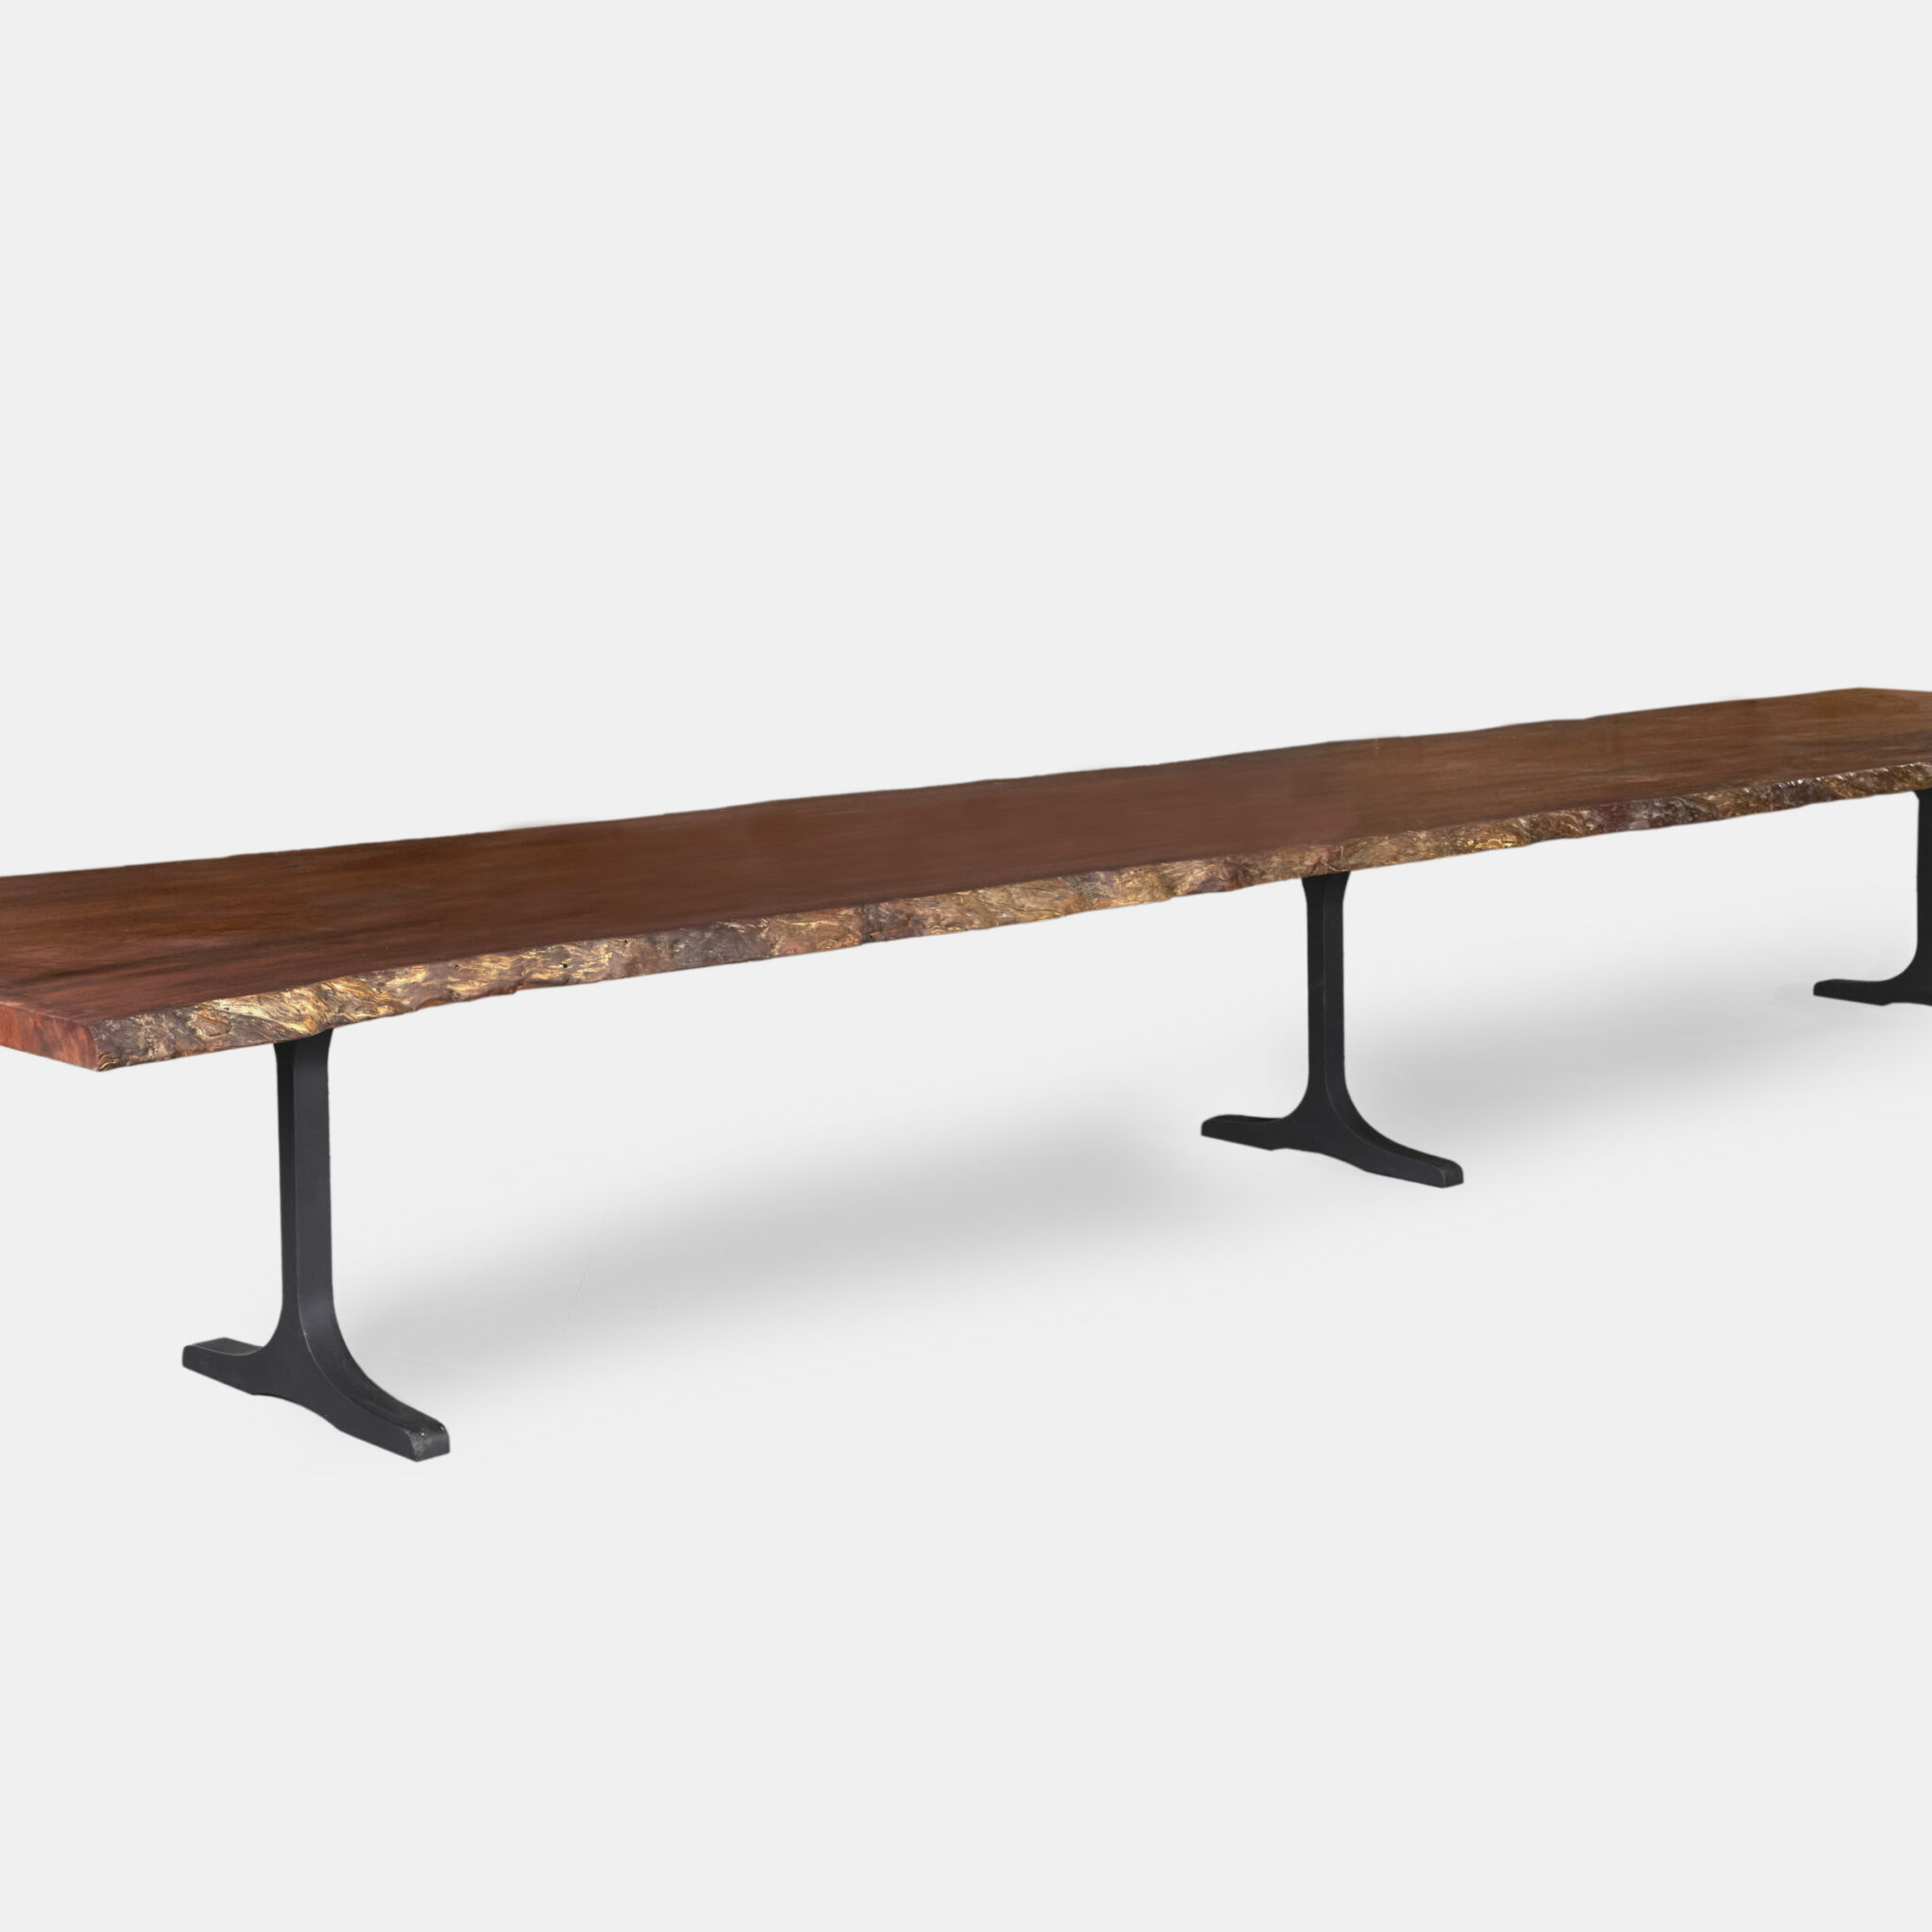 Rouge Dining Table made of Jarrah timber, showcasing its natural beauty and craftsmanship.